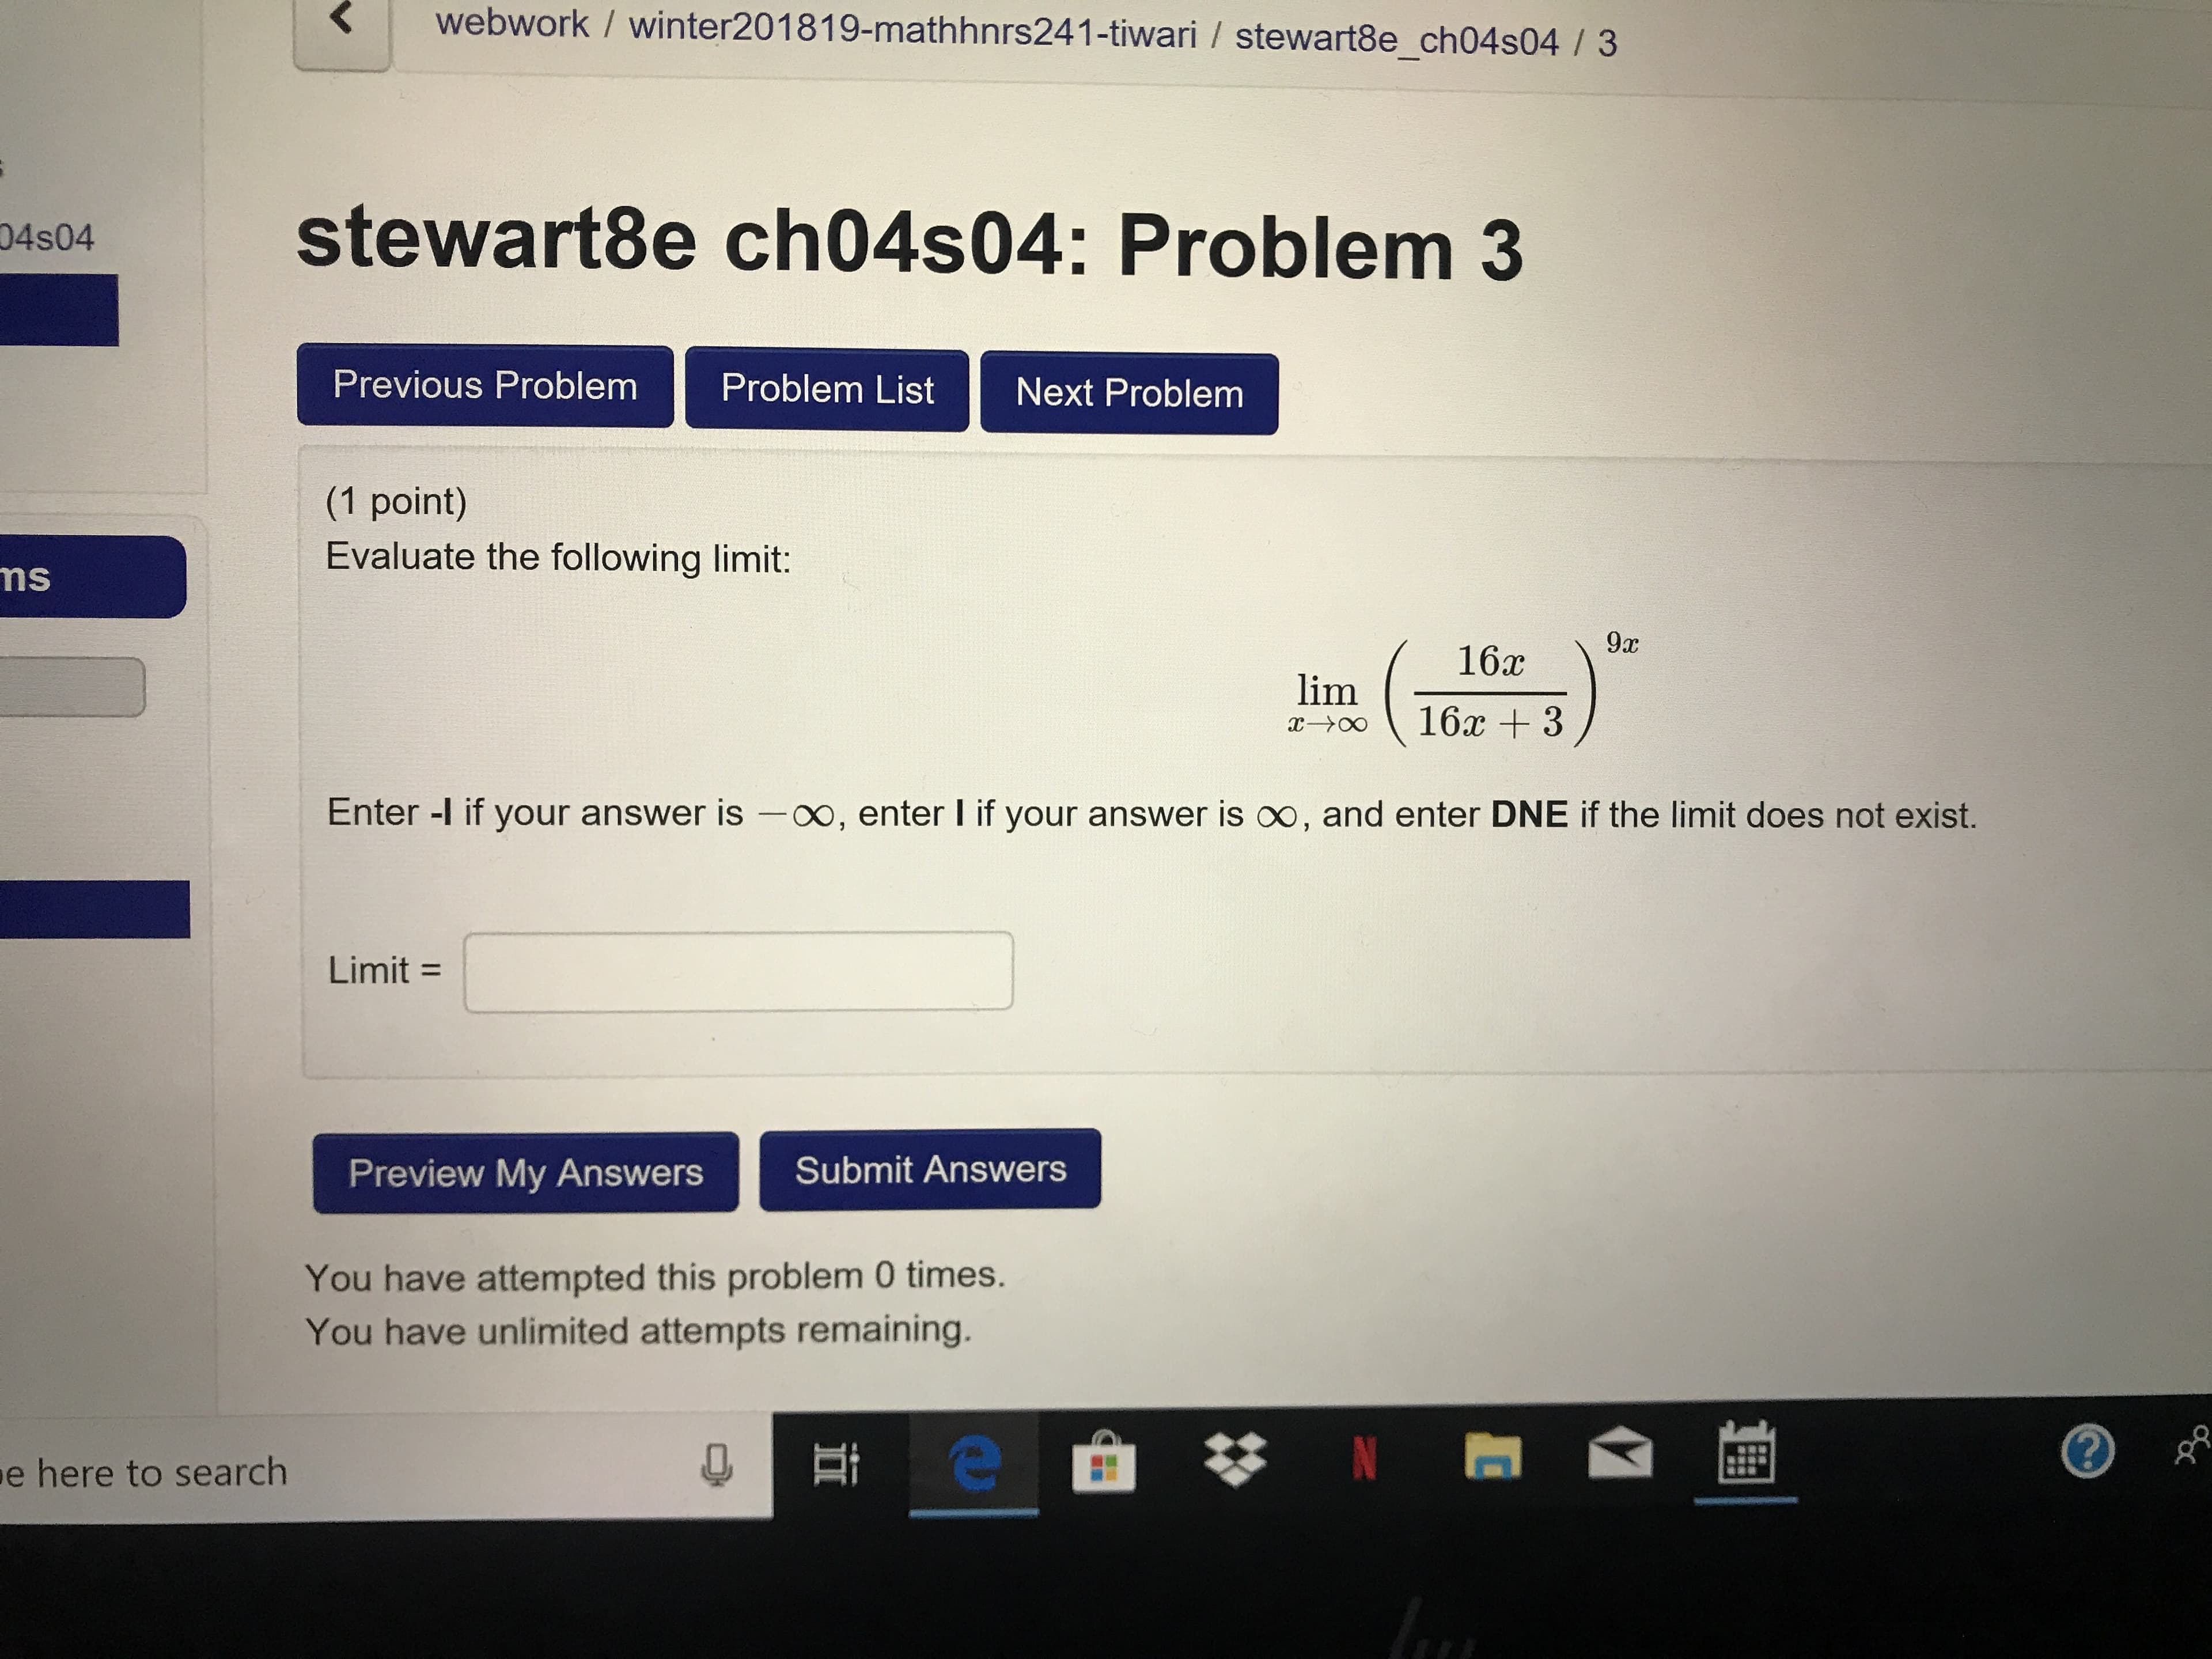 webwork / winter201819-mathhnrs241-tiwari / stewart8e_ch04s04 /3
stewart8e ch04s04: Problem 3
04s04
Previous Problem Problem List Next Problem
(1 point)
Evaluate the following limit:
ns
Enter -l if your answer is -oo, enter I if your answer is oo, and enter DNE if the limit does not exist.
Limit
Preview My AnswersSubmit Answers
You have attempted this problem 0 times.
You have unlimited attempts remaining.
e
here to search
